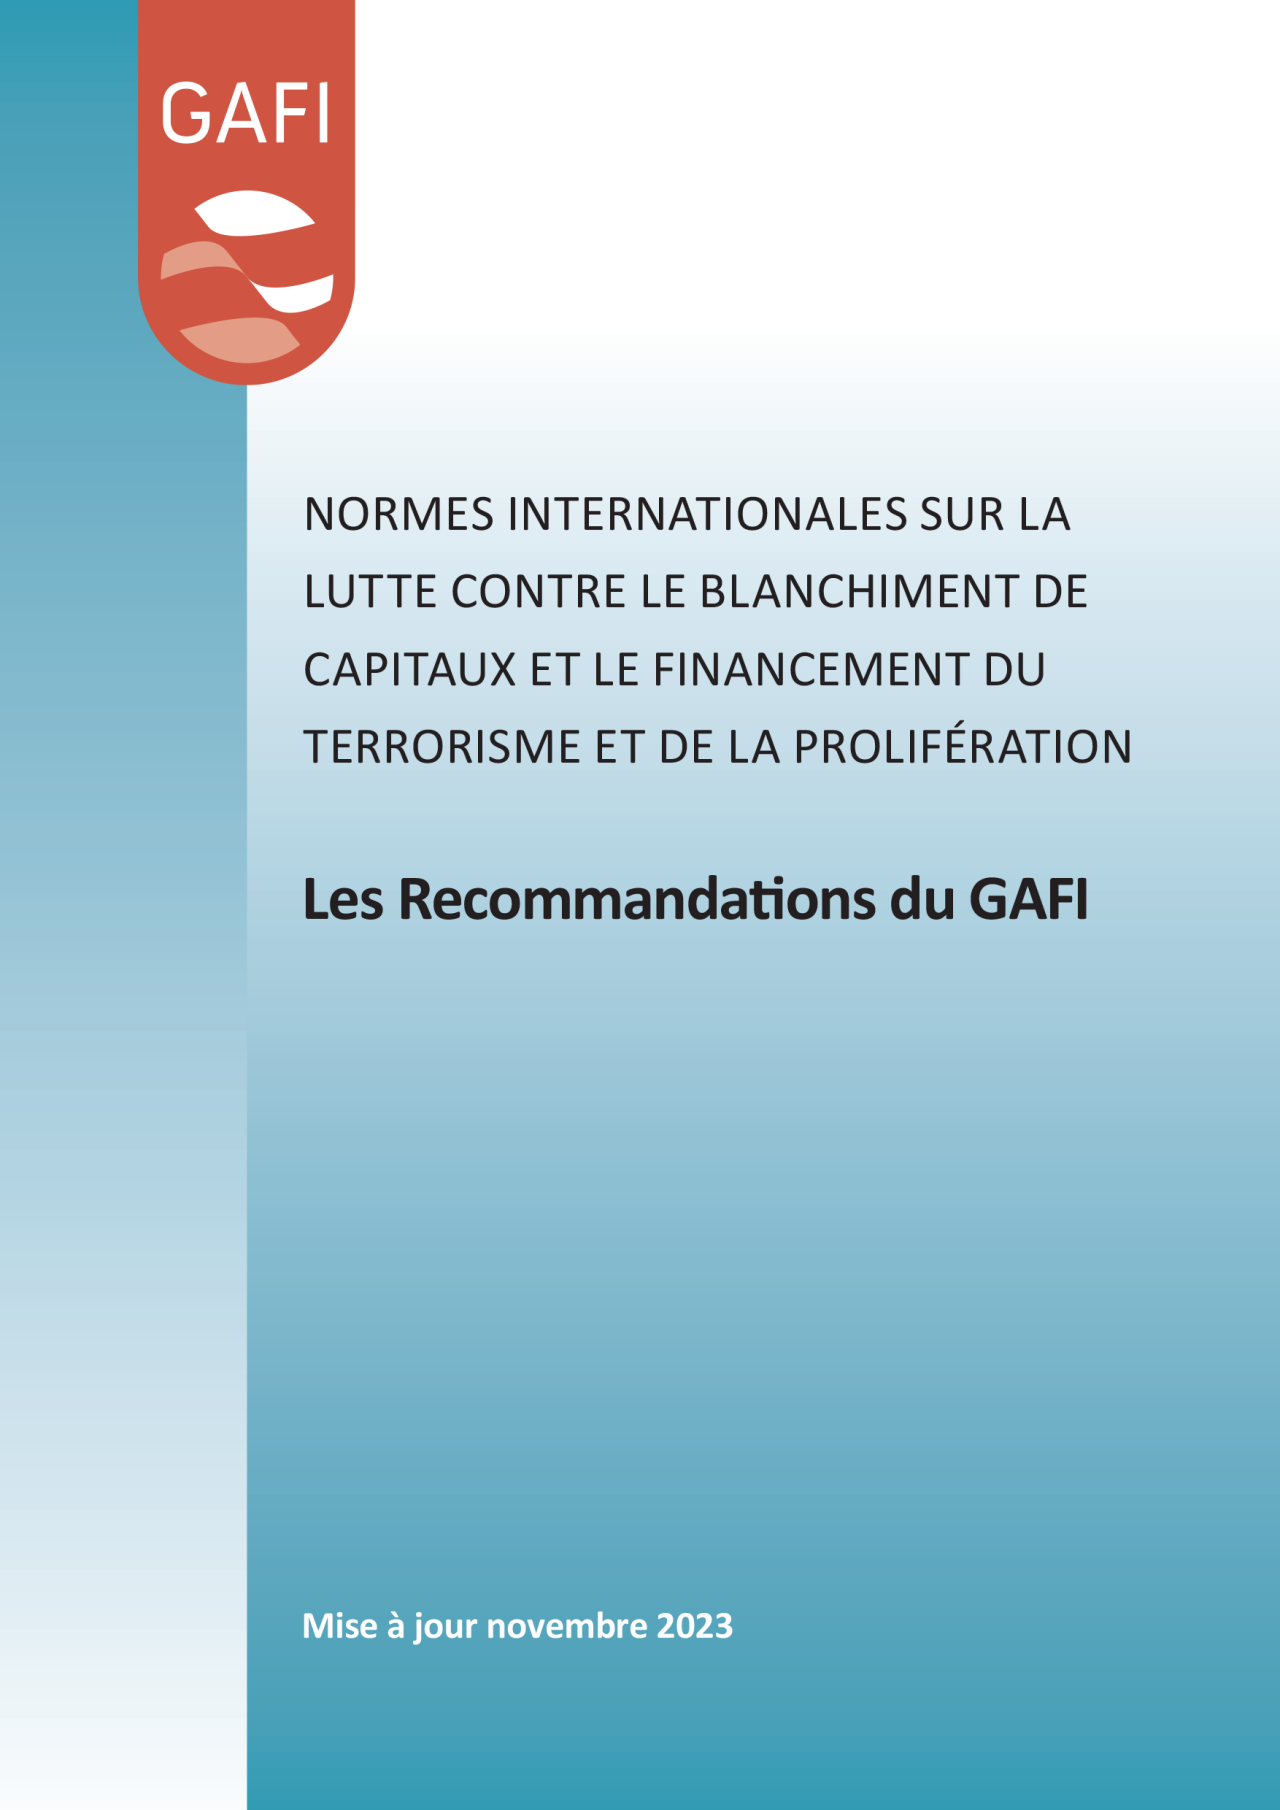 FATF-Recommendations